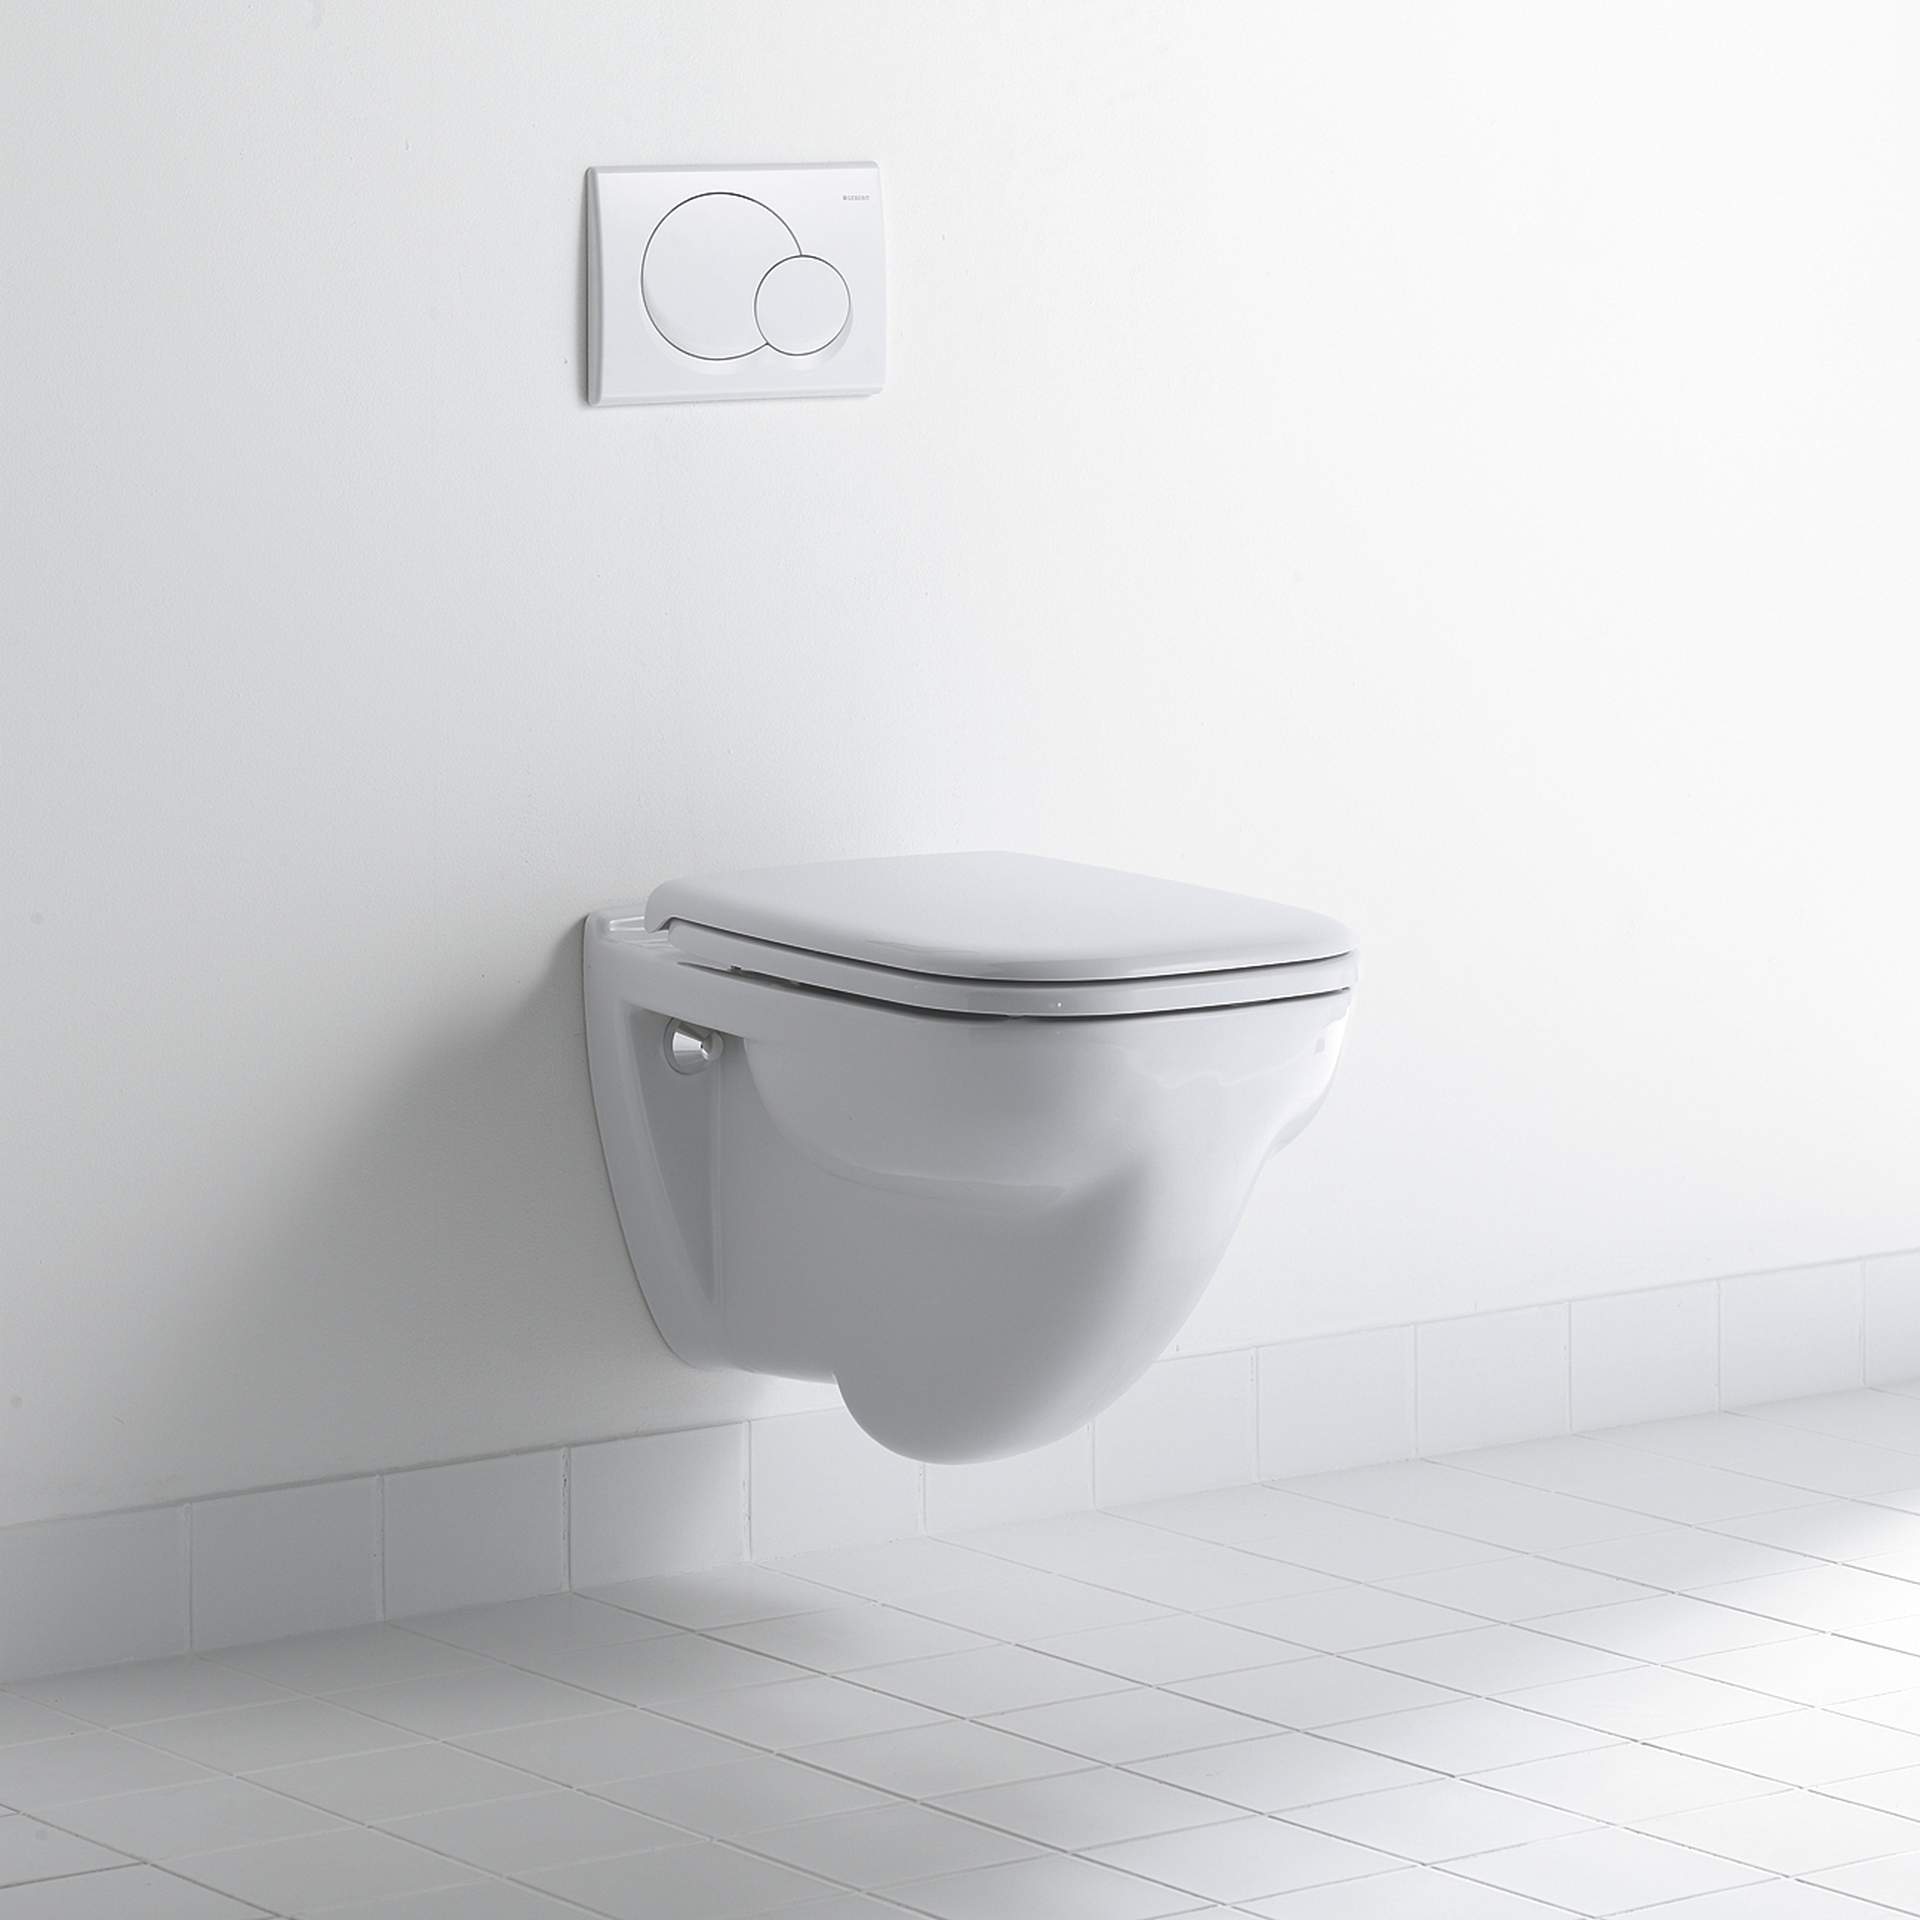 Barrier-free bathroom with height toilet
